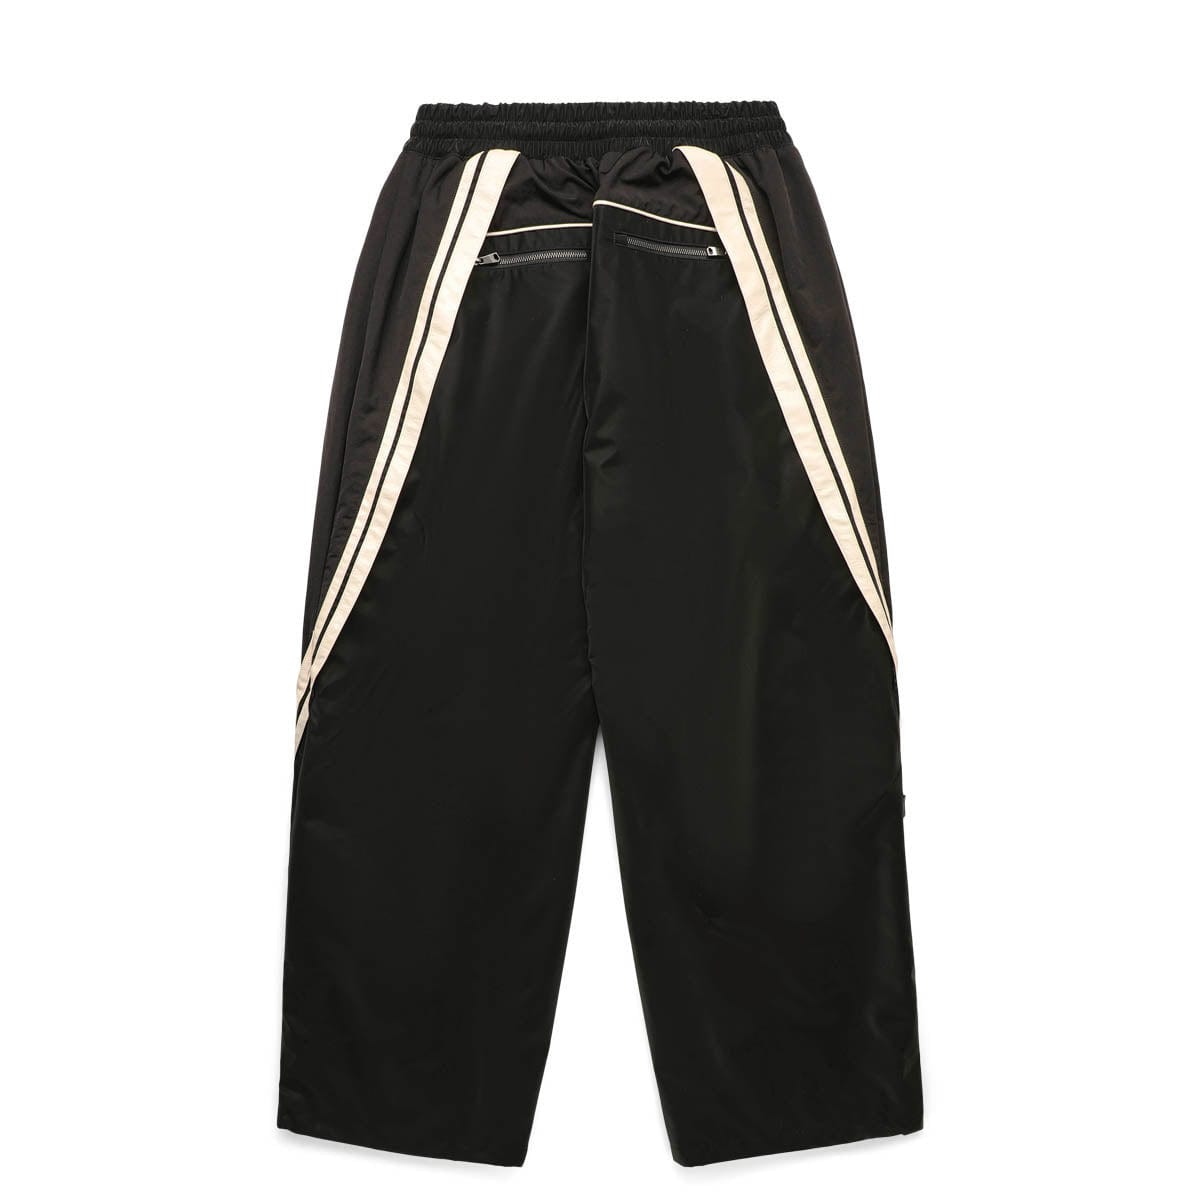 Ader Error Bottoms PLEATED WARM UP PANTS